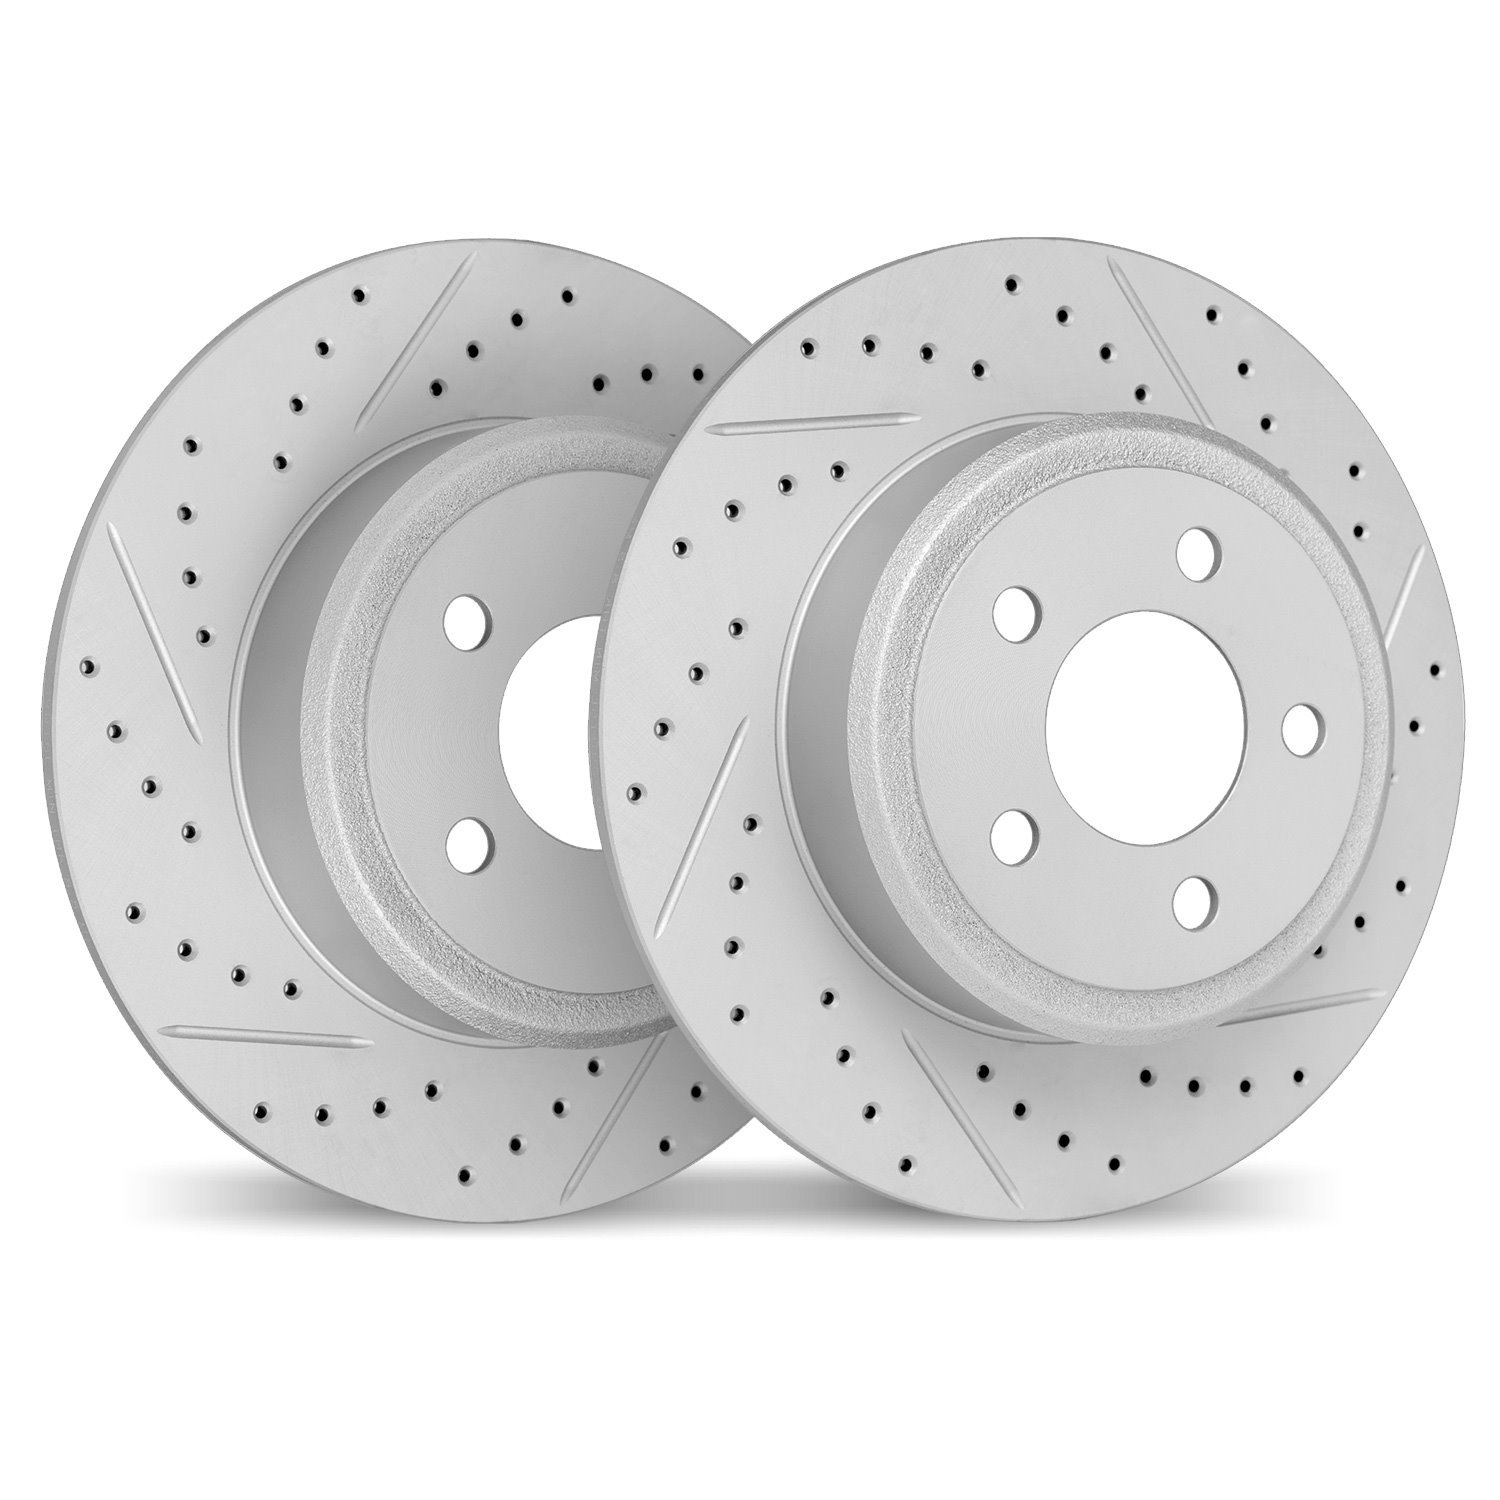 2002-54131 Geoperformance Drilled/Slotted Brake Rotors, 2005-2008 Ford/Lincoln/Mercury/Mazda, Position: Rear